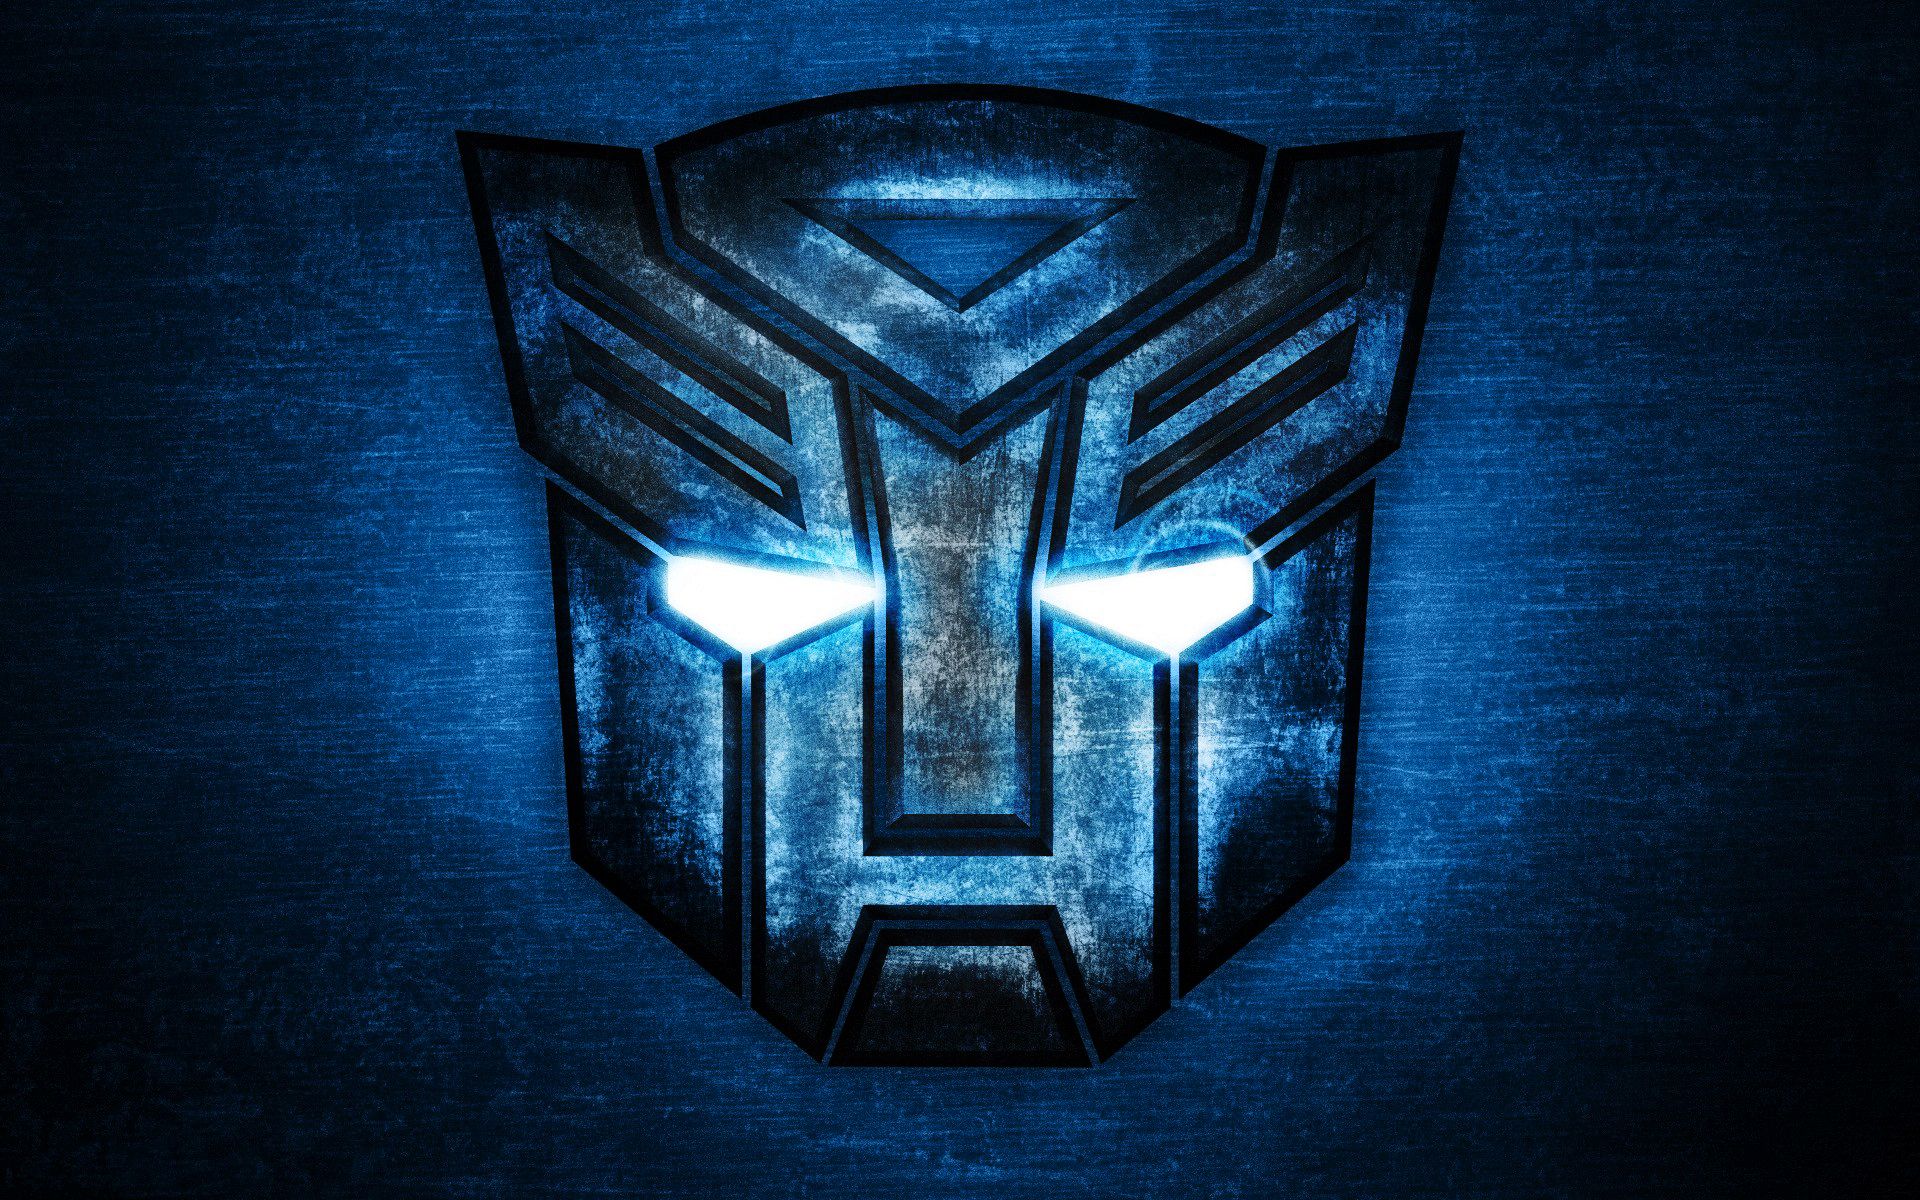 Gallery of Autobots Symbols   Mifty is Bored 1920x1200